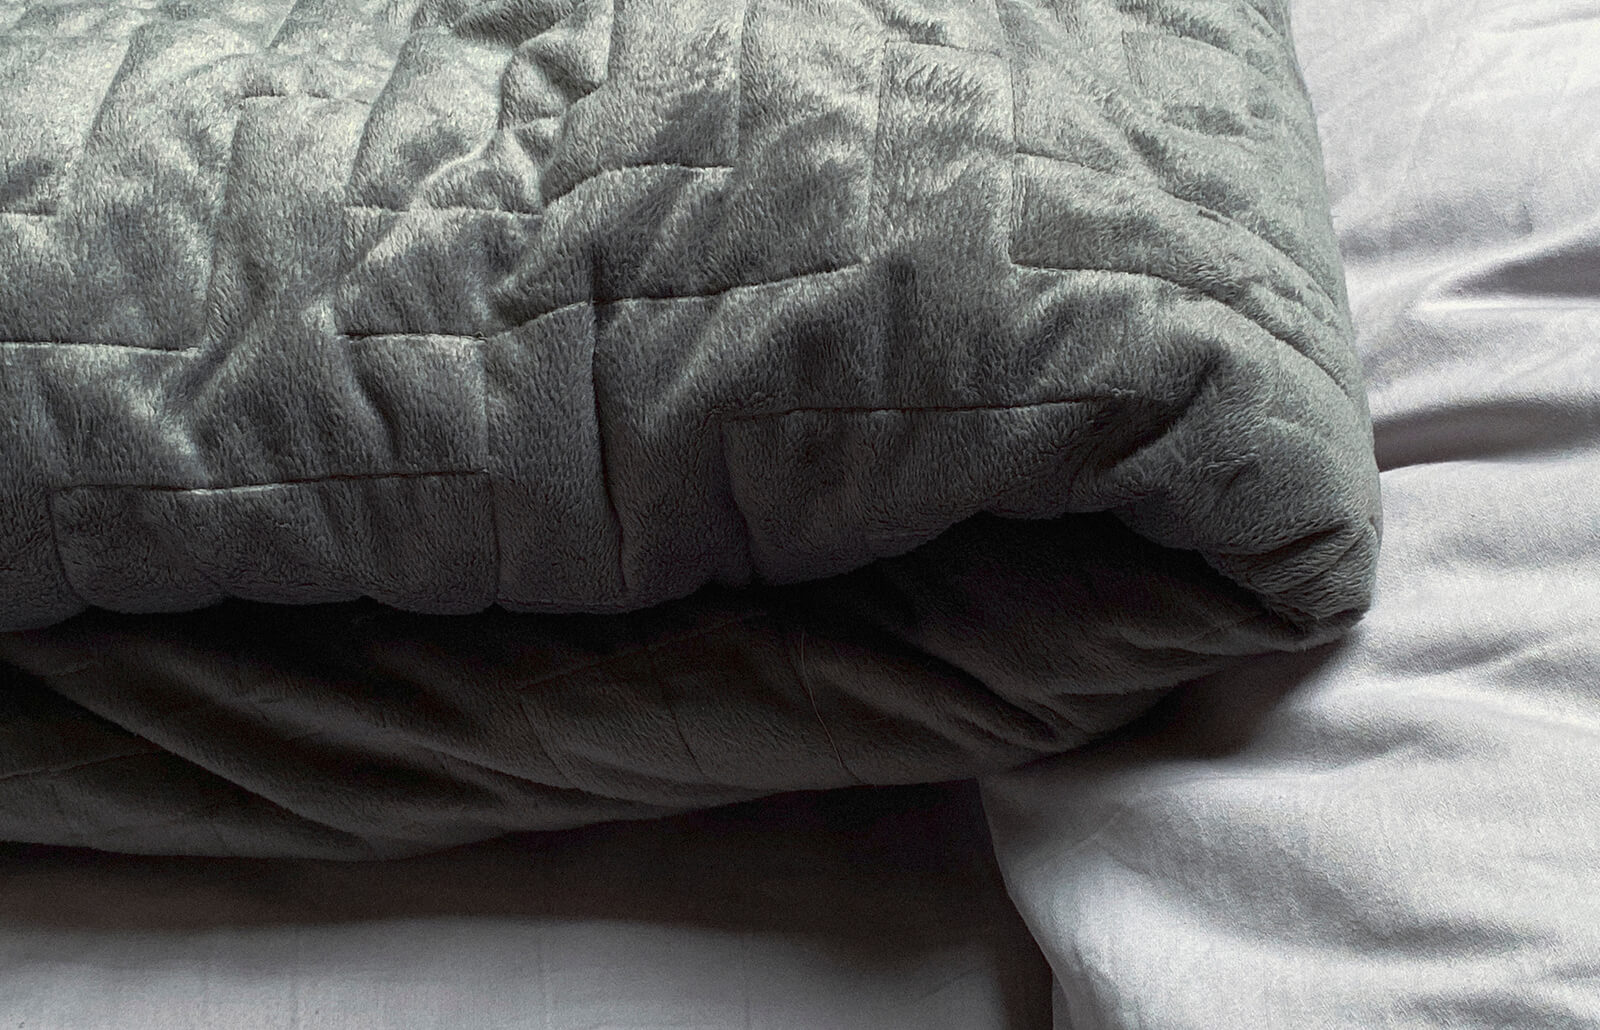 Dry Clean a Weighted Blanket